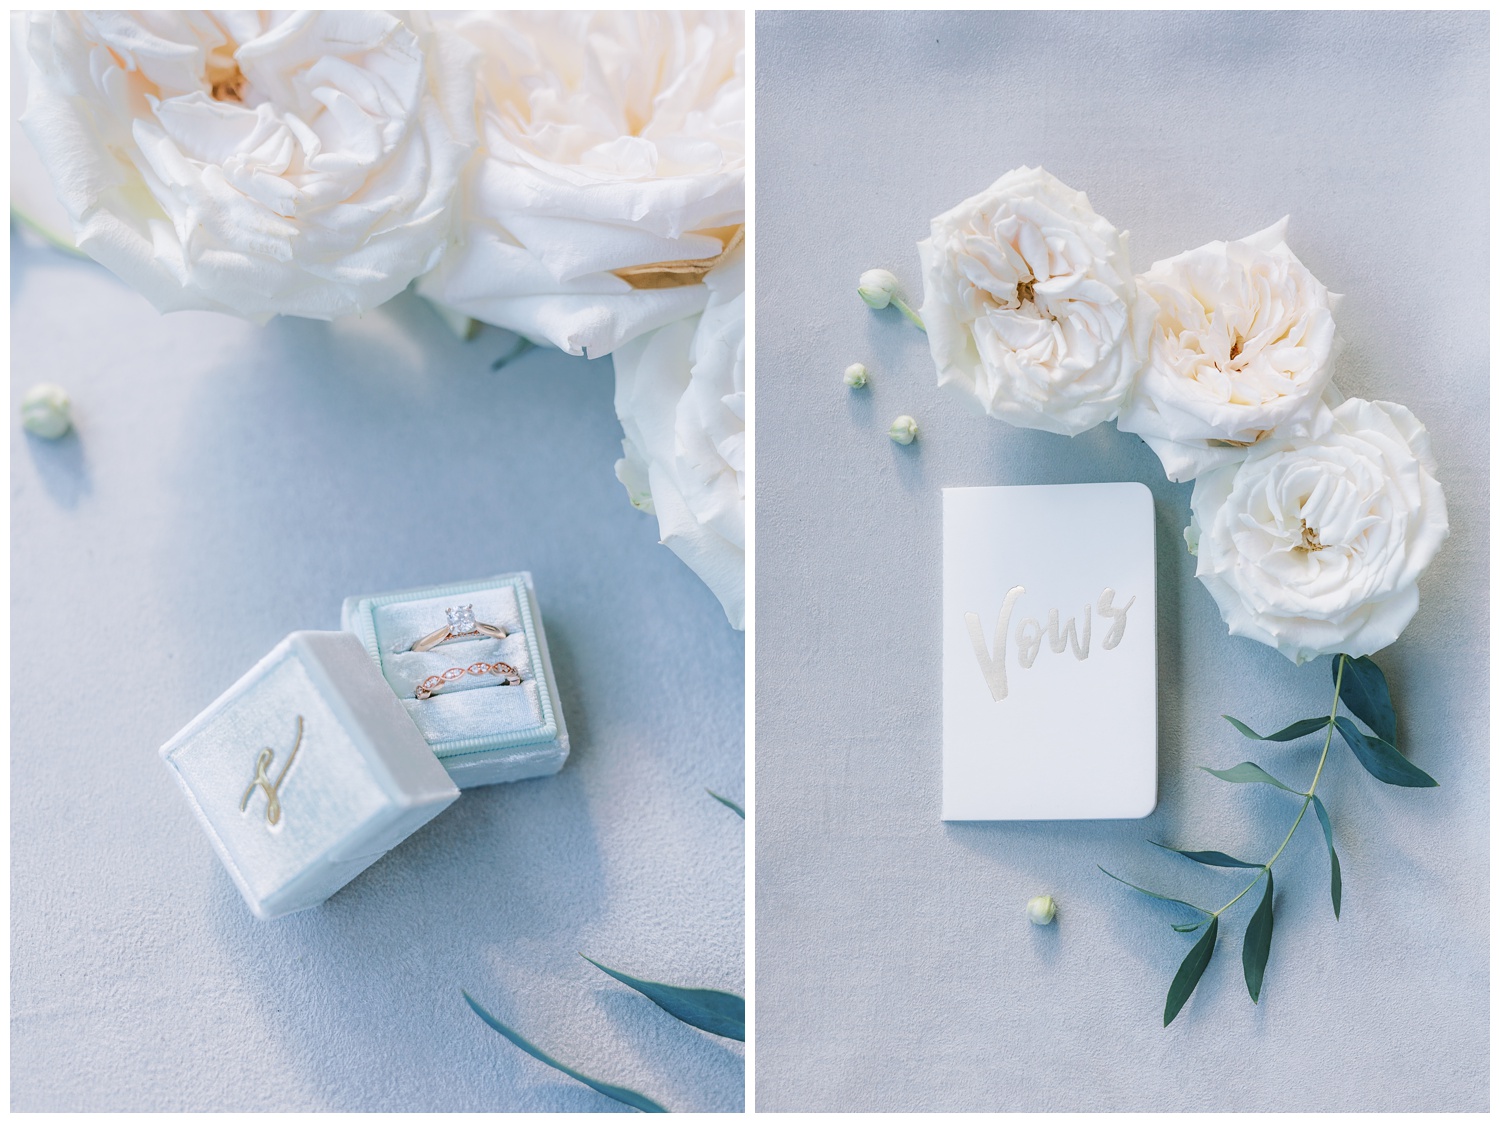 Wedding rings in Mrs Box and vow book with wedding flowers